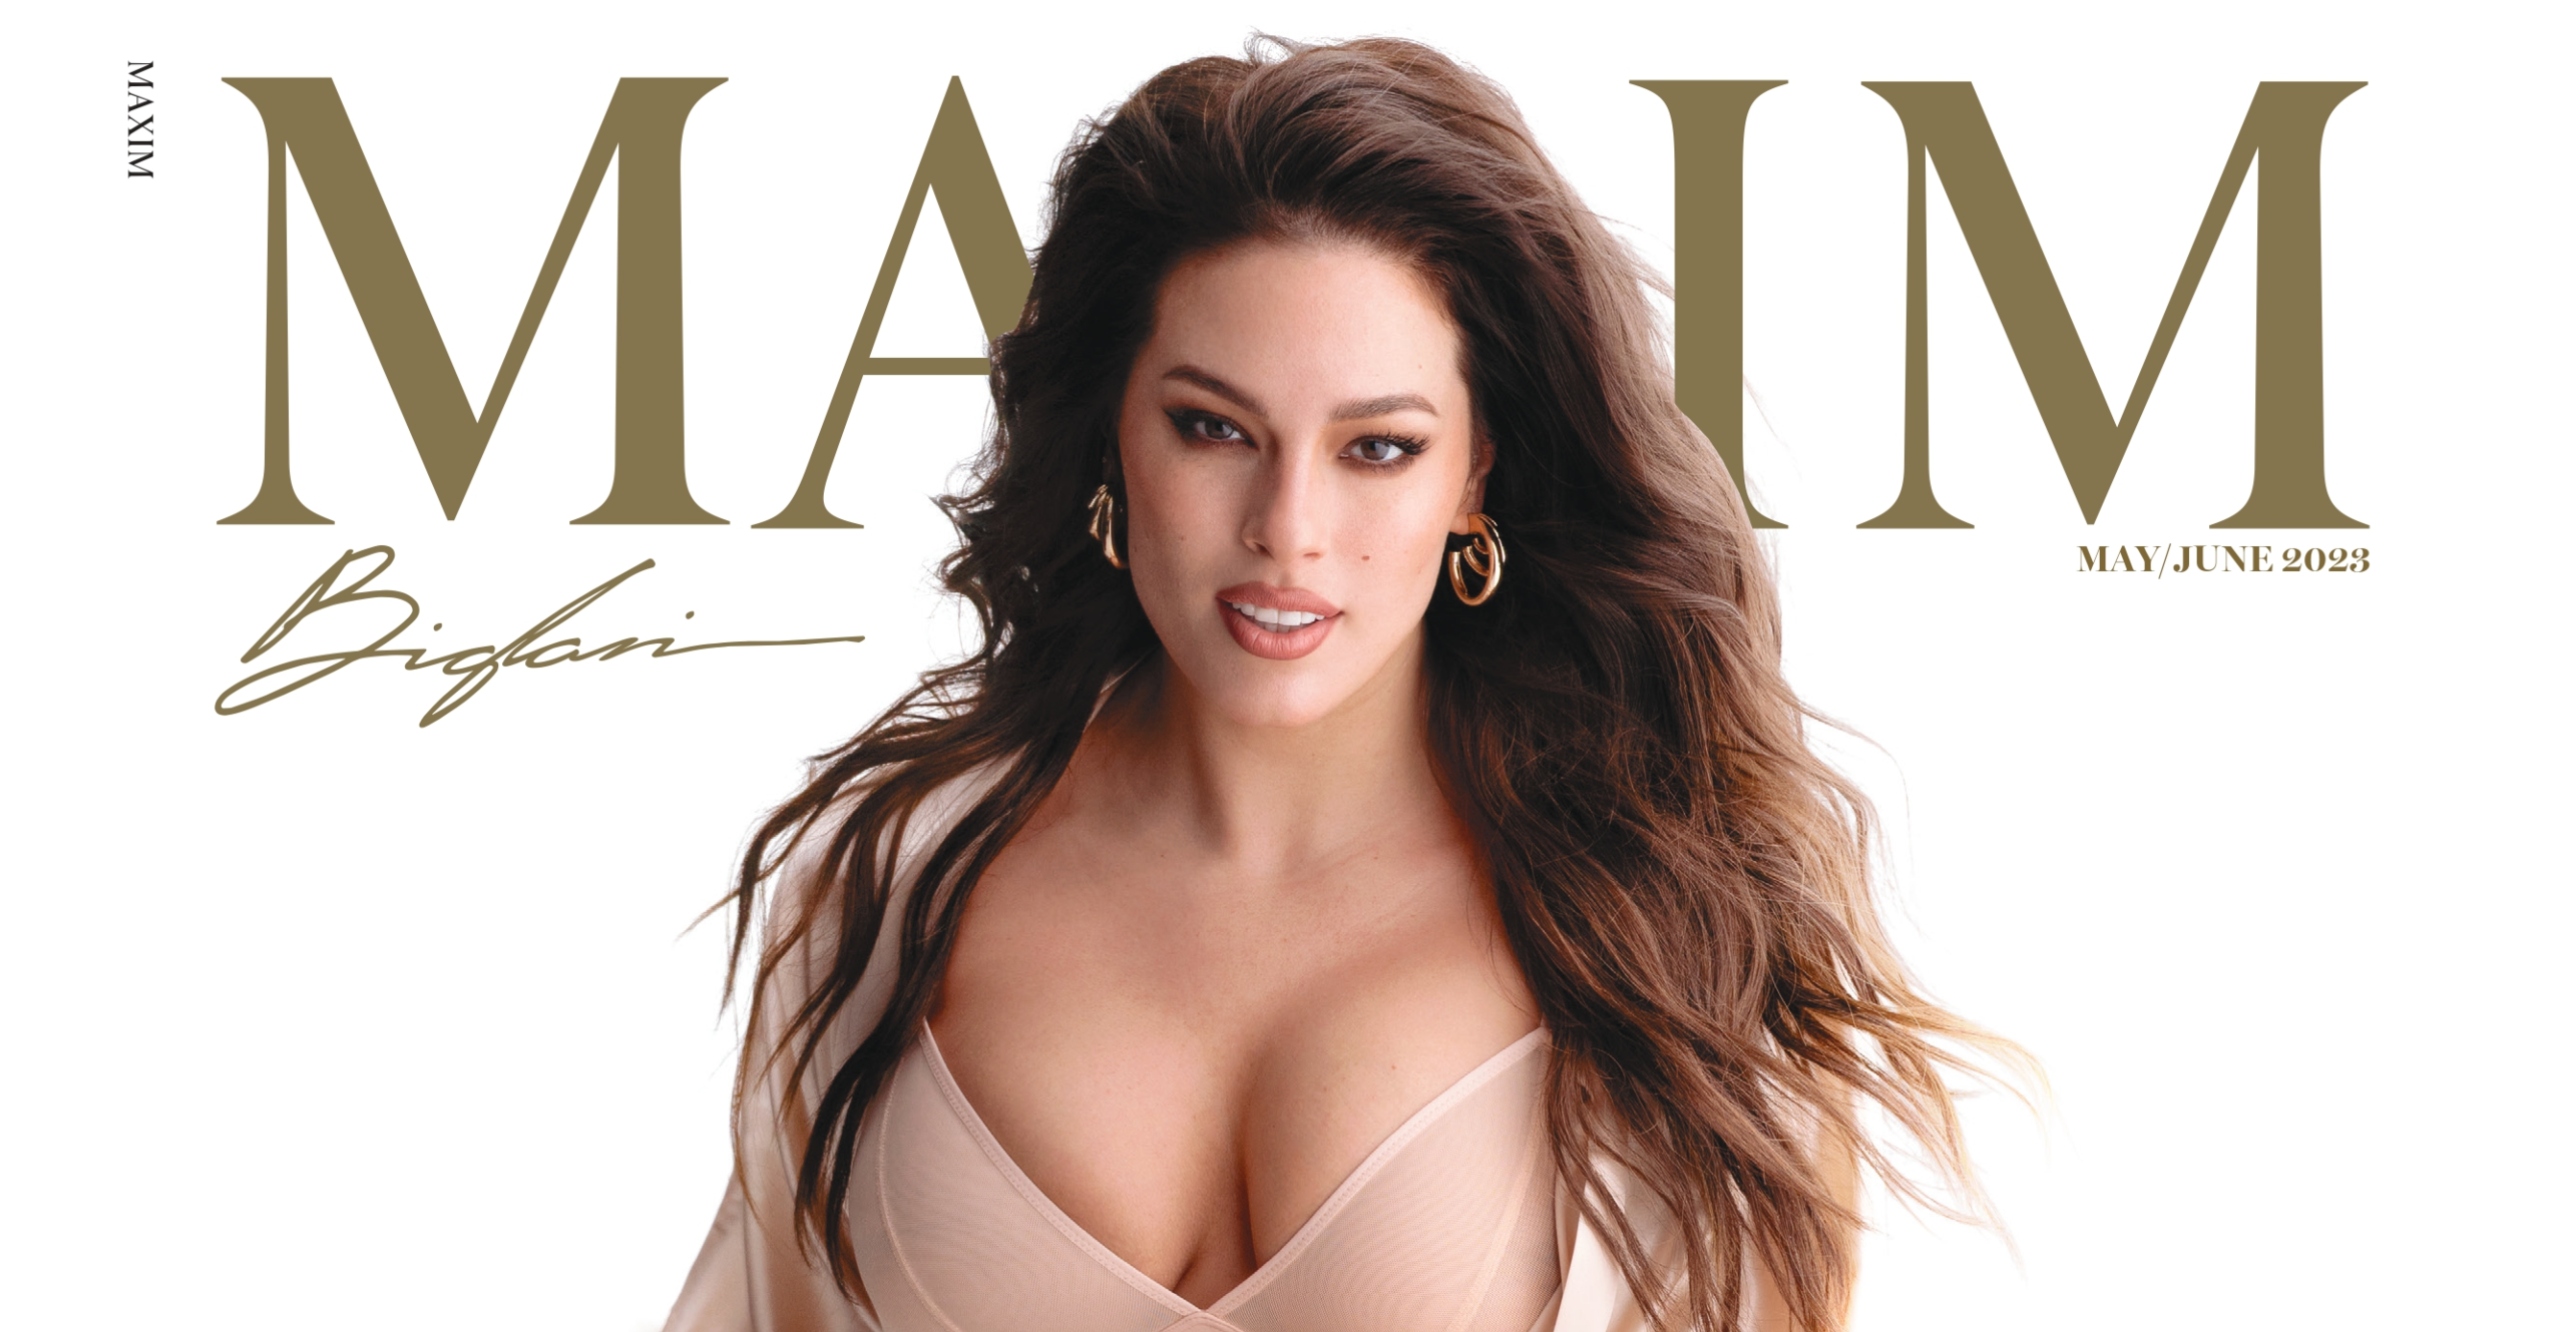 Ashley Graham's New Dress Collection Will Flatter Every Body Type